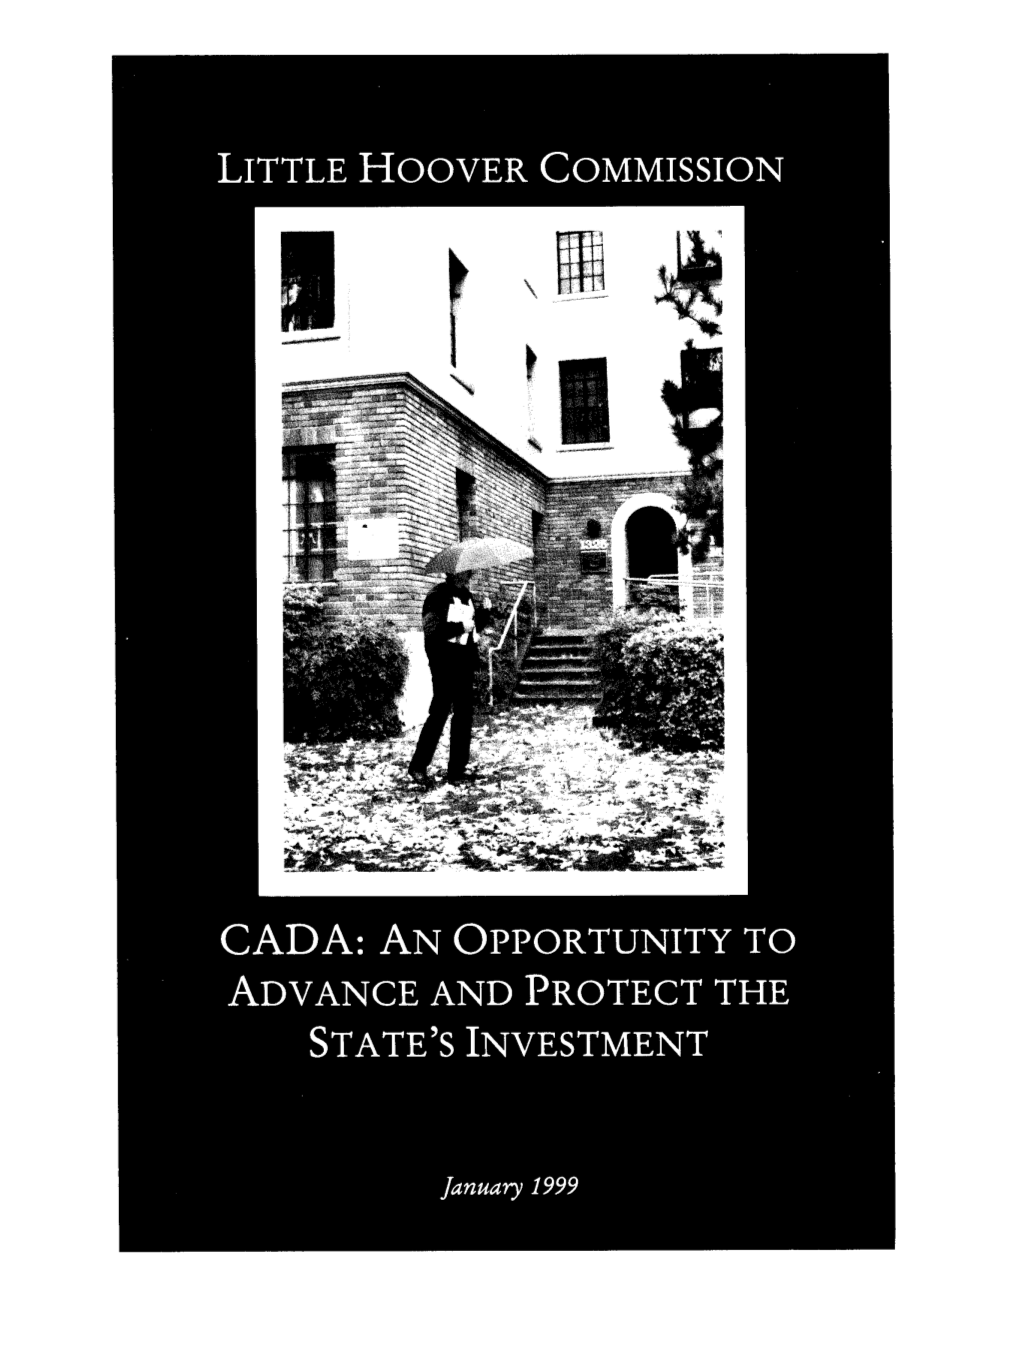 CADA: an Opportunity to Advance and Protect the State's Investment